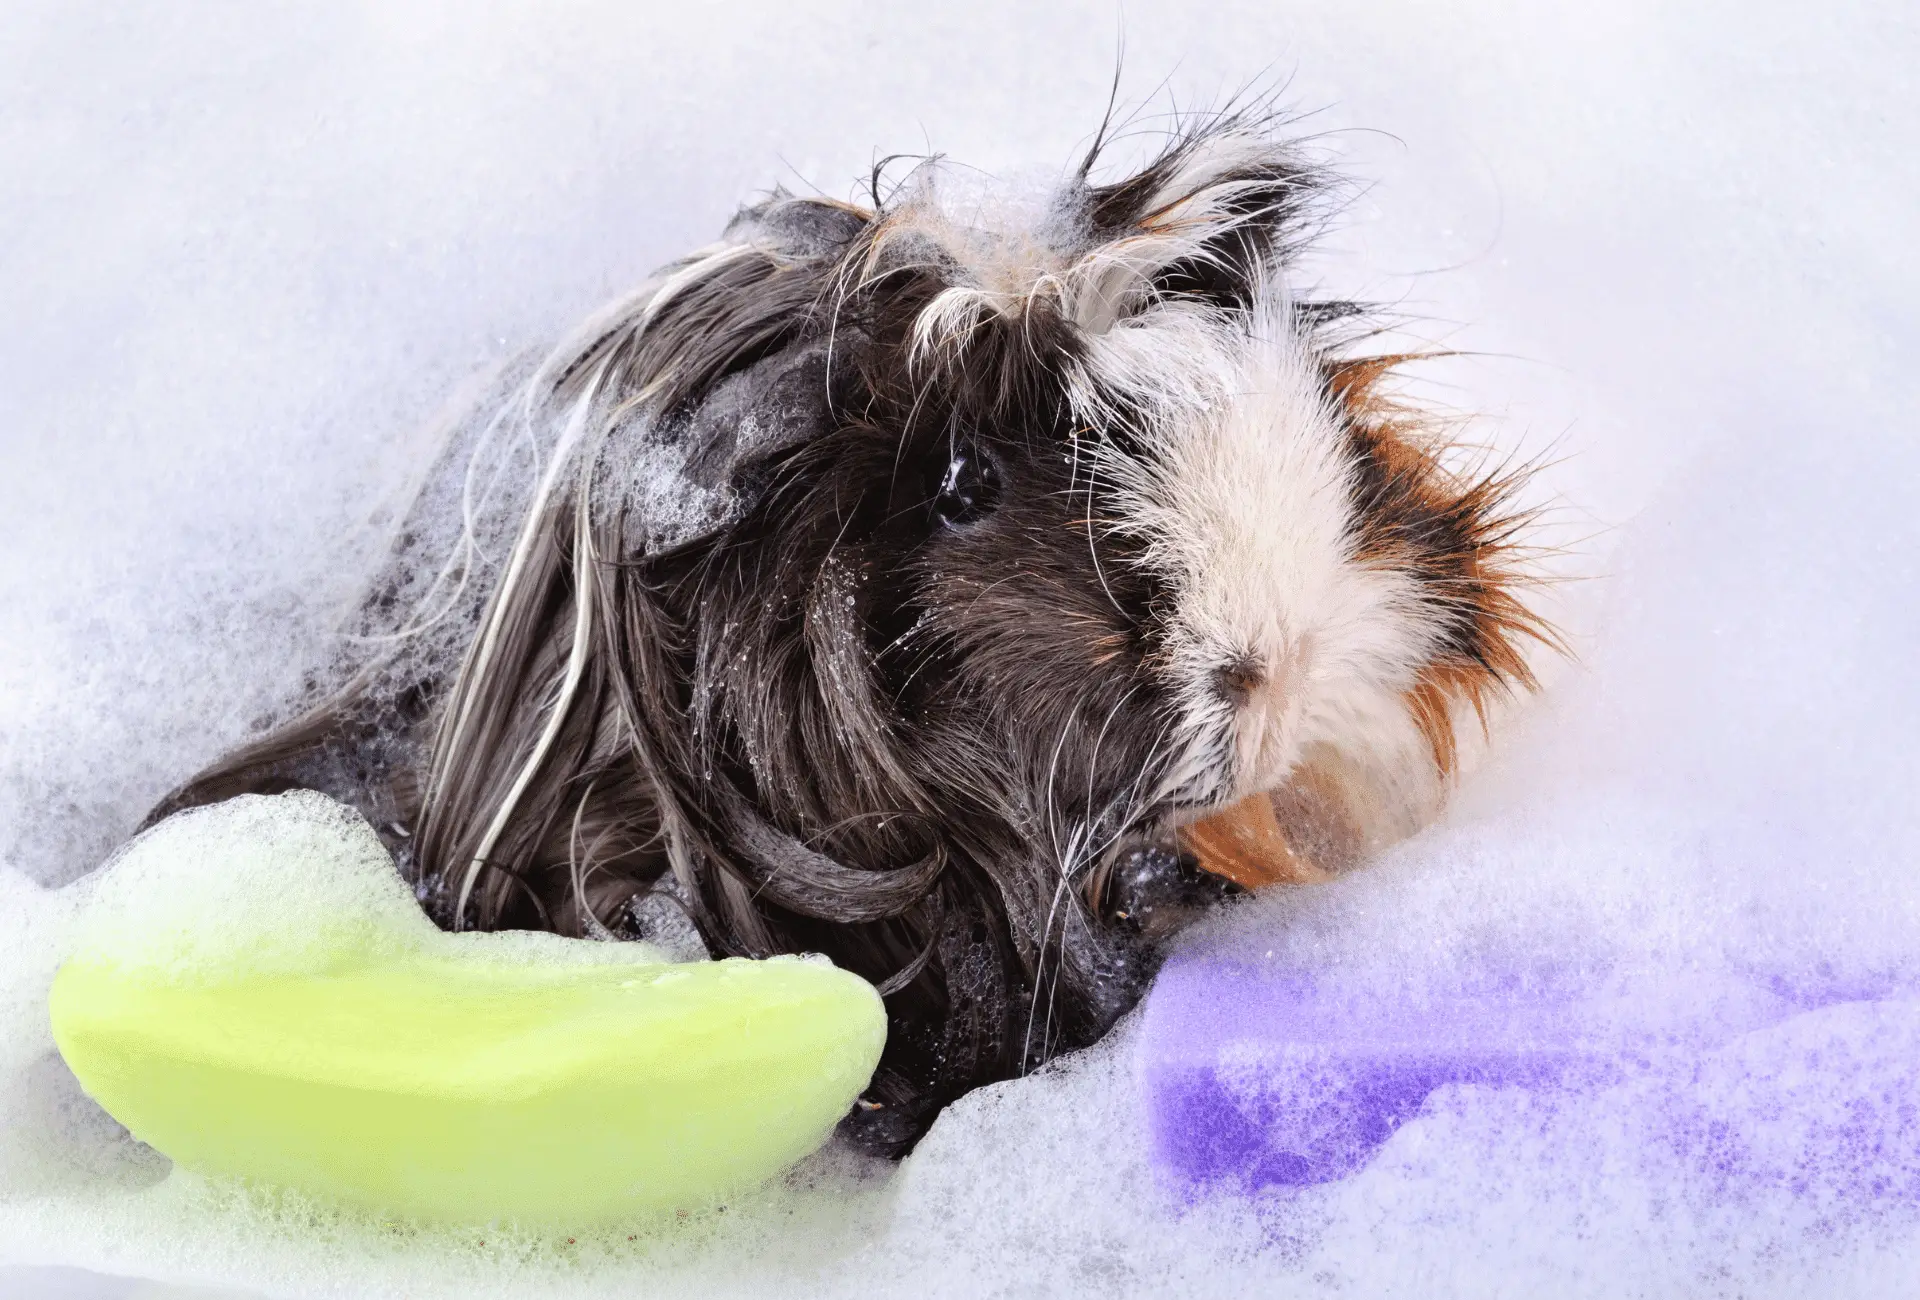 Guinea pig with shampoo all over the body waiting to be bathed.